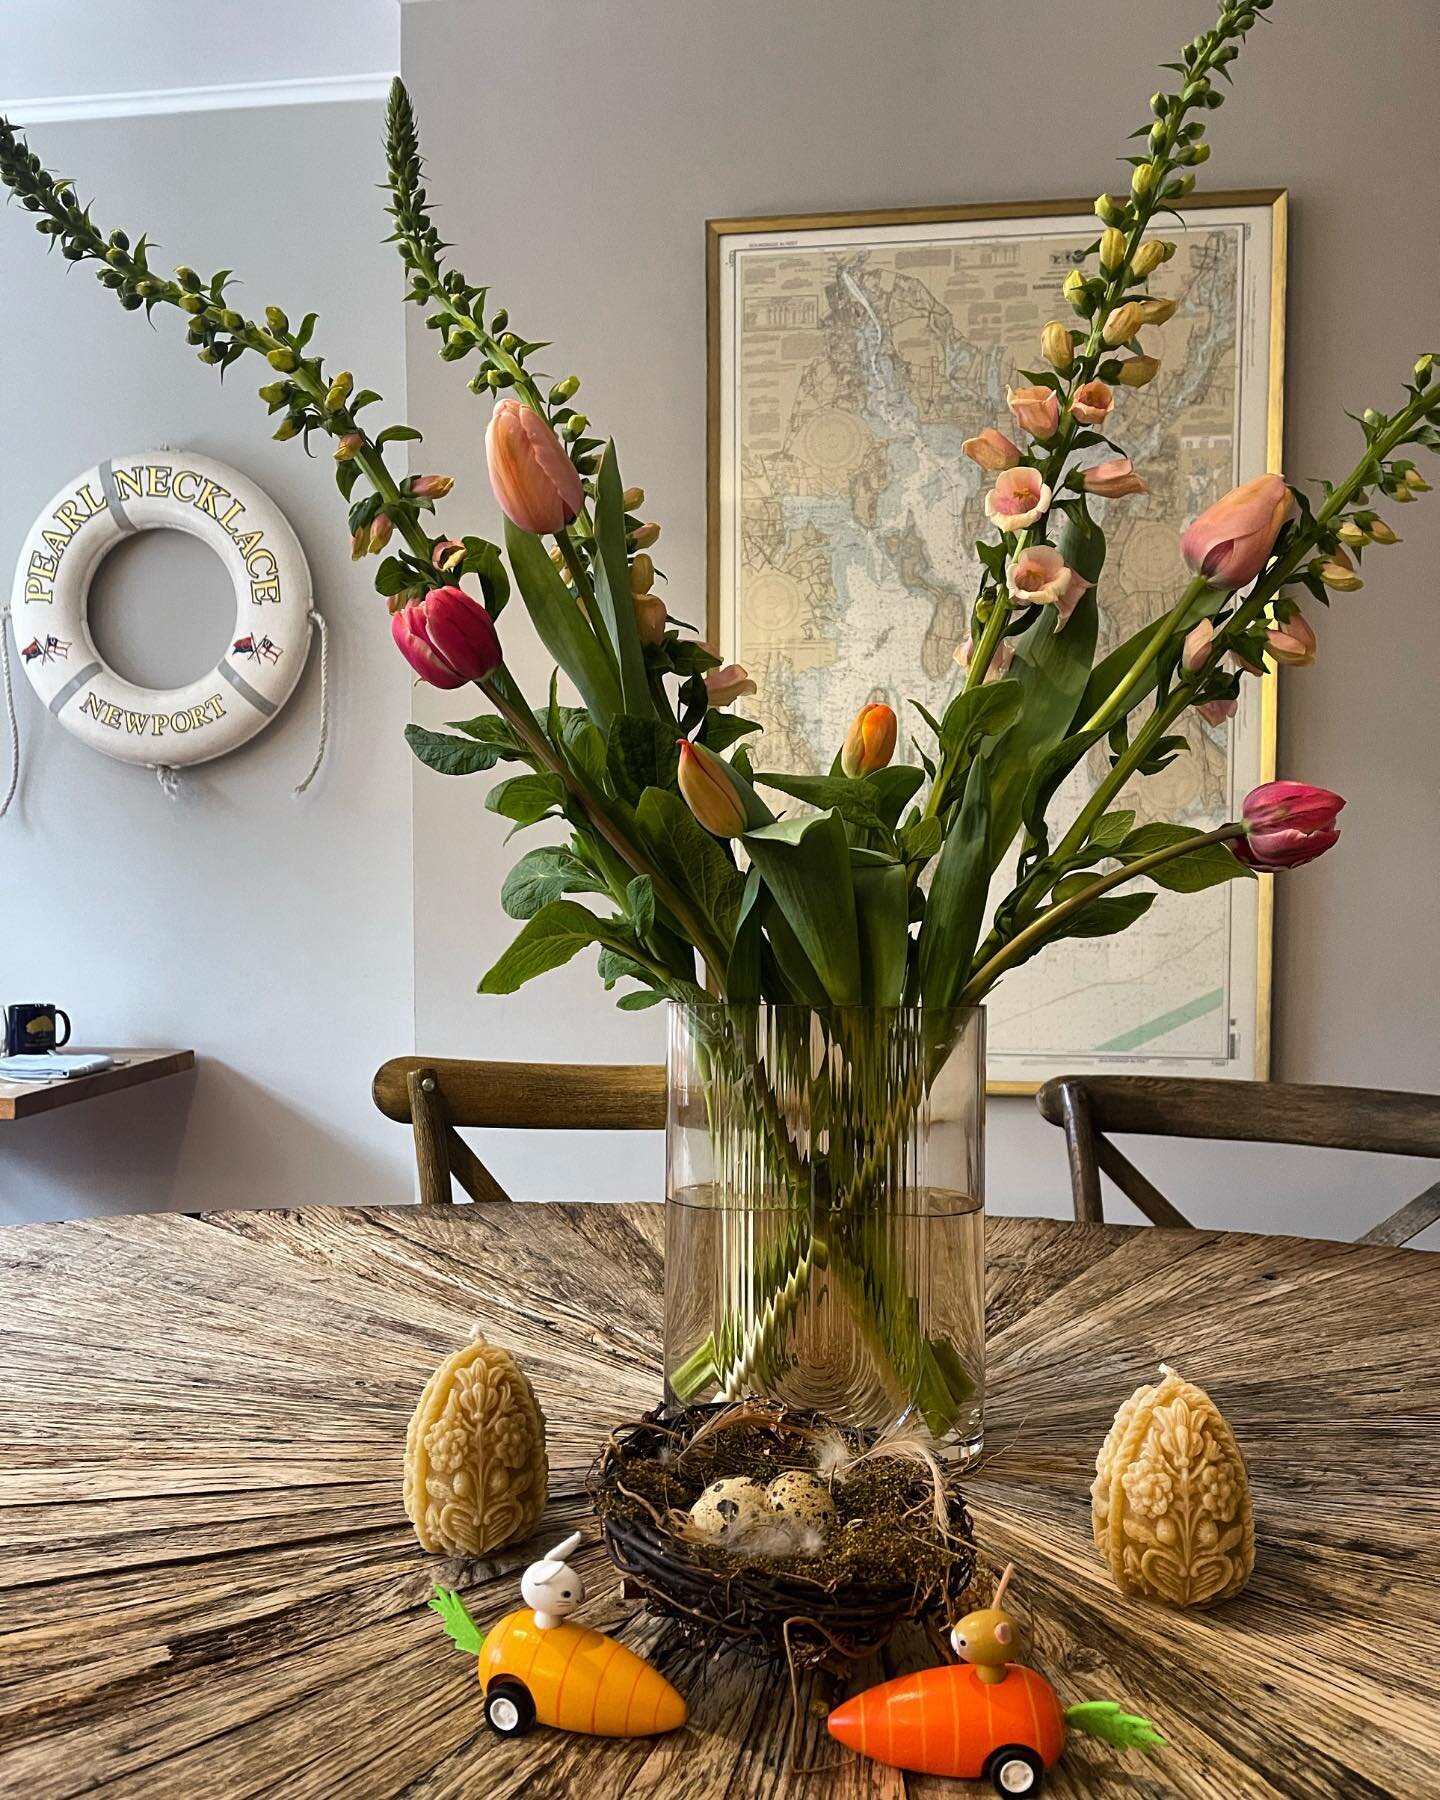 We&rsquo;re Easter ready here at the Chart House! We hope you&rsquo;re having a terrific spring weekend, no matter what your celebrating. 🥕🐰
.
.
#easter #flowerarrangement #spring #sprang #sprung #newportri #travel #boutiquehotel #bnb #airbnb #airb